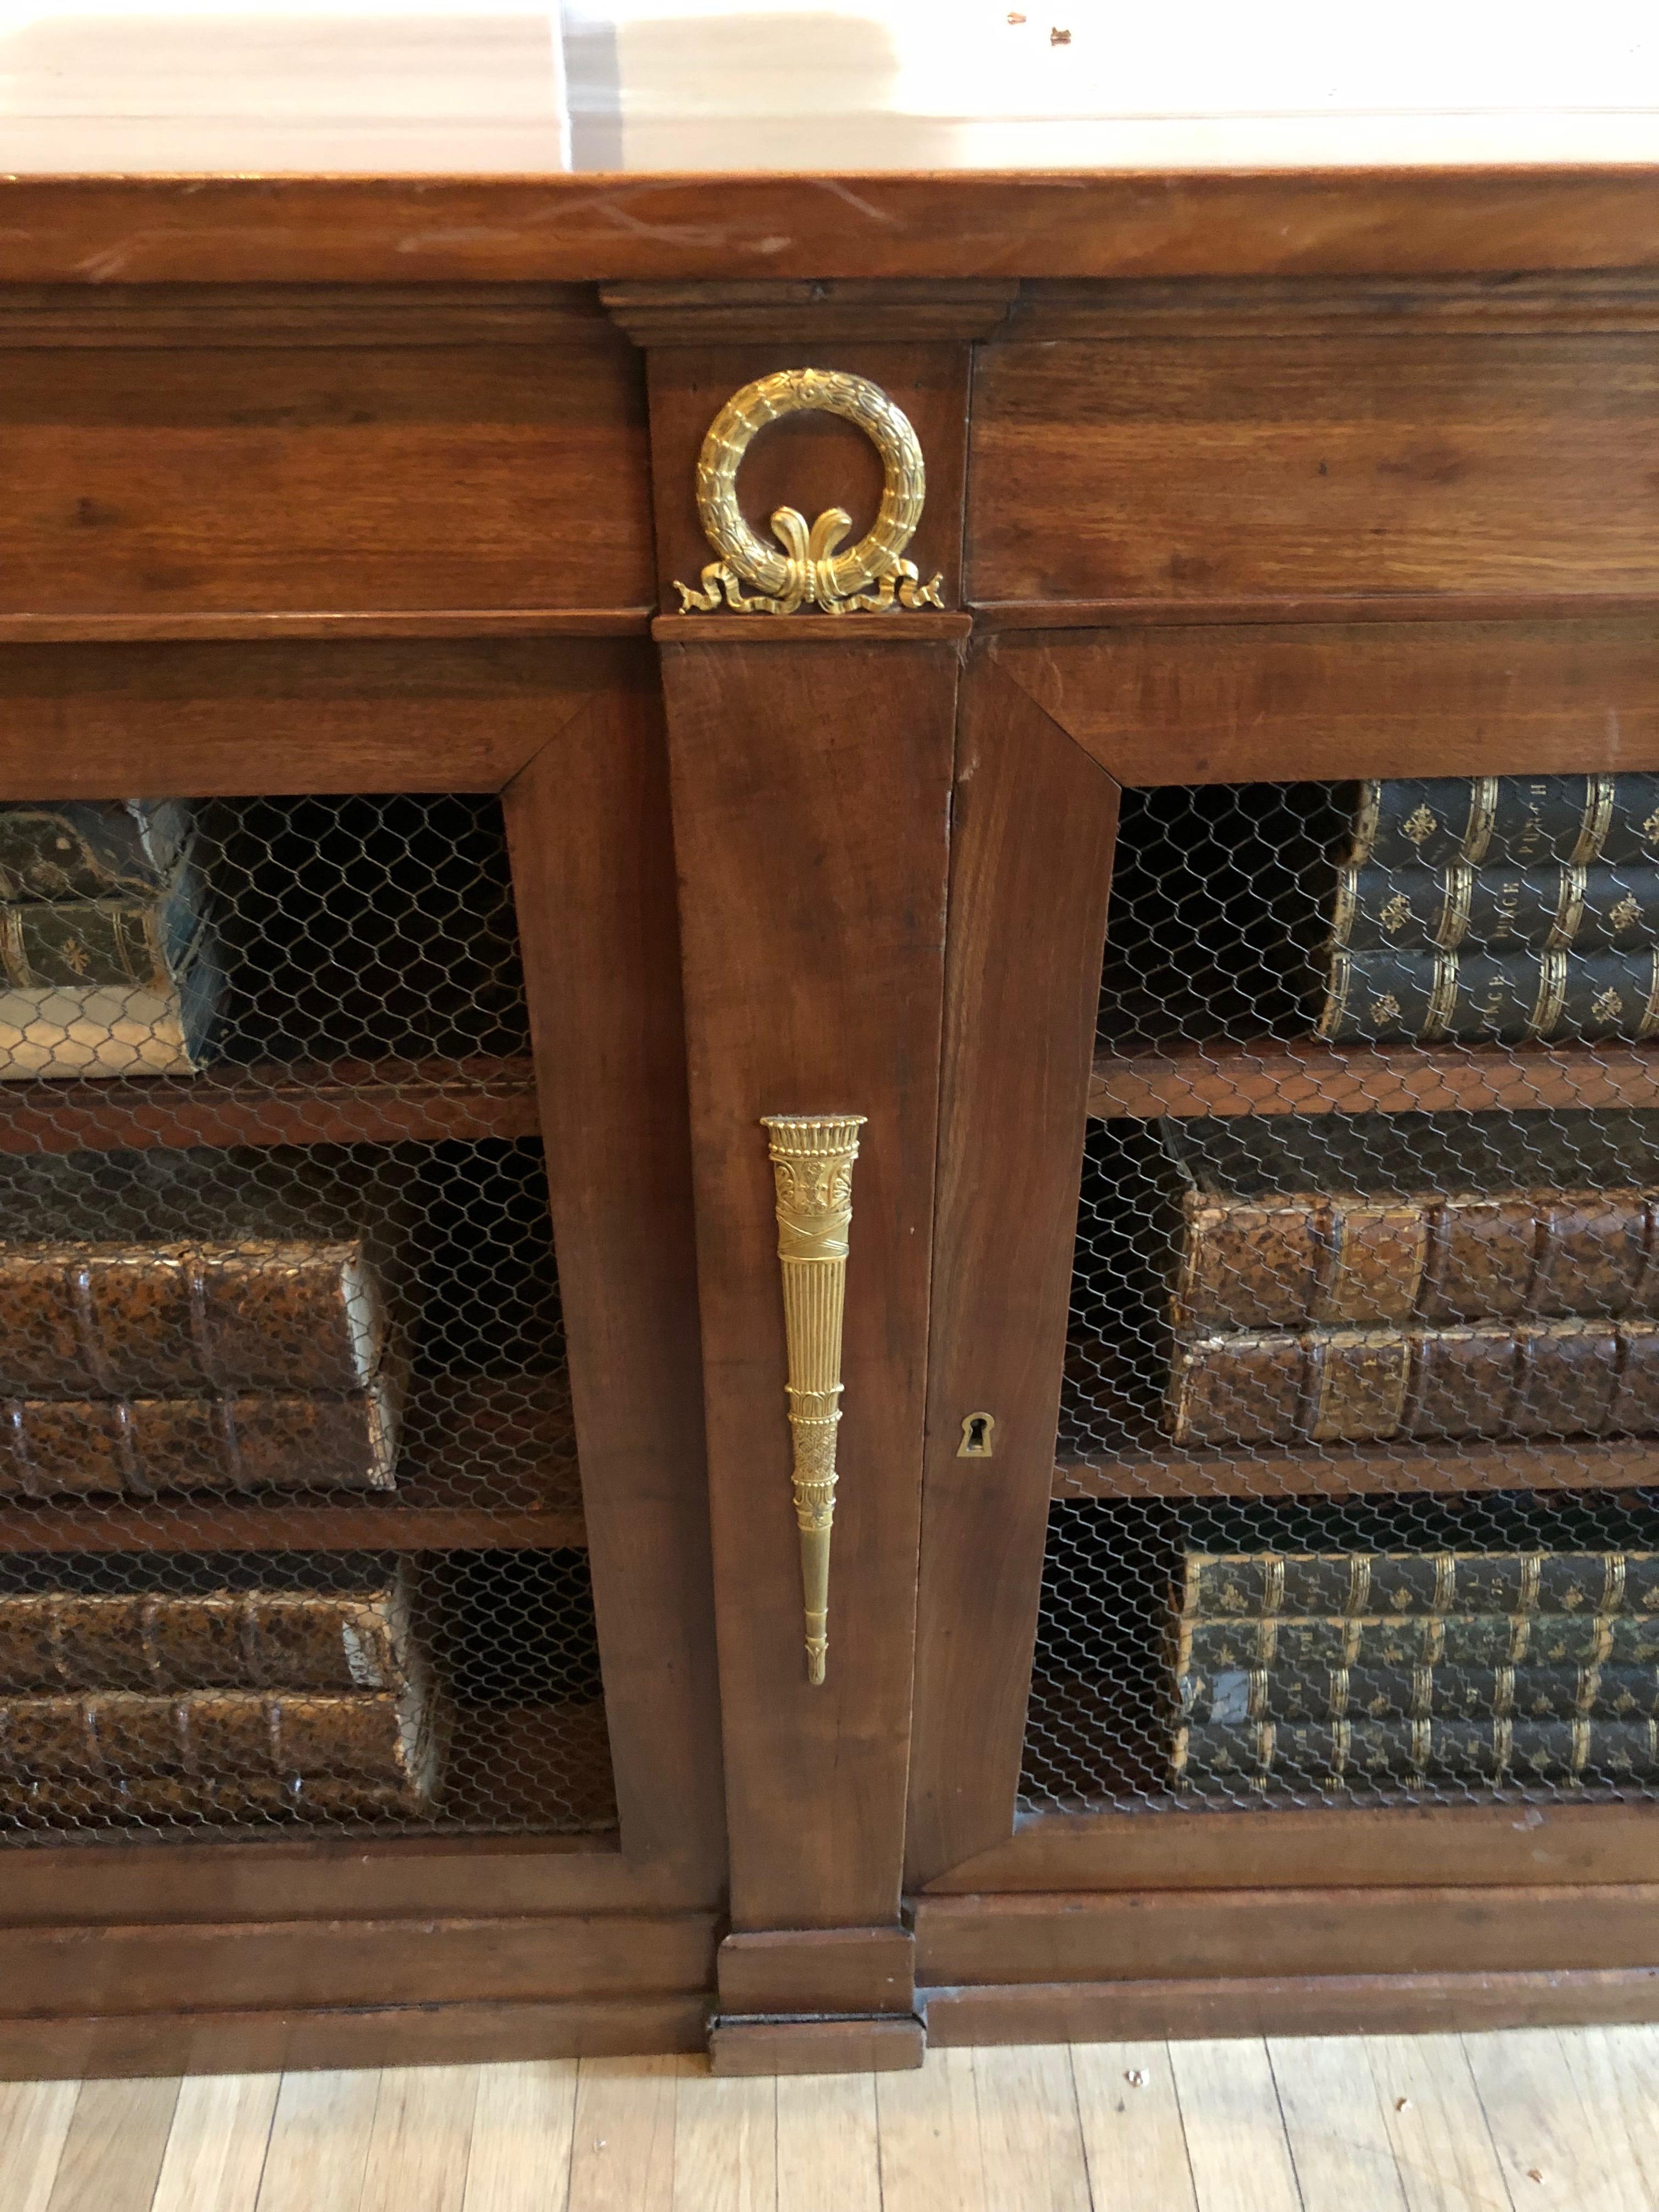 Empire mahogany bookcase,
French, circa 1815.
Measures: 39 1/4 x 63 1/2 x 19 1/8 inches.
With gilt metal mounts.